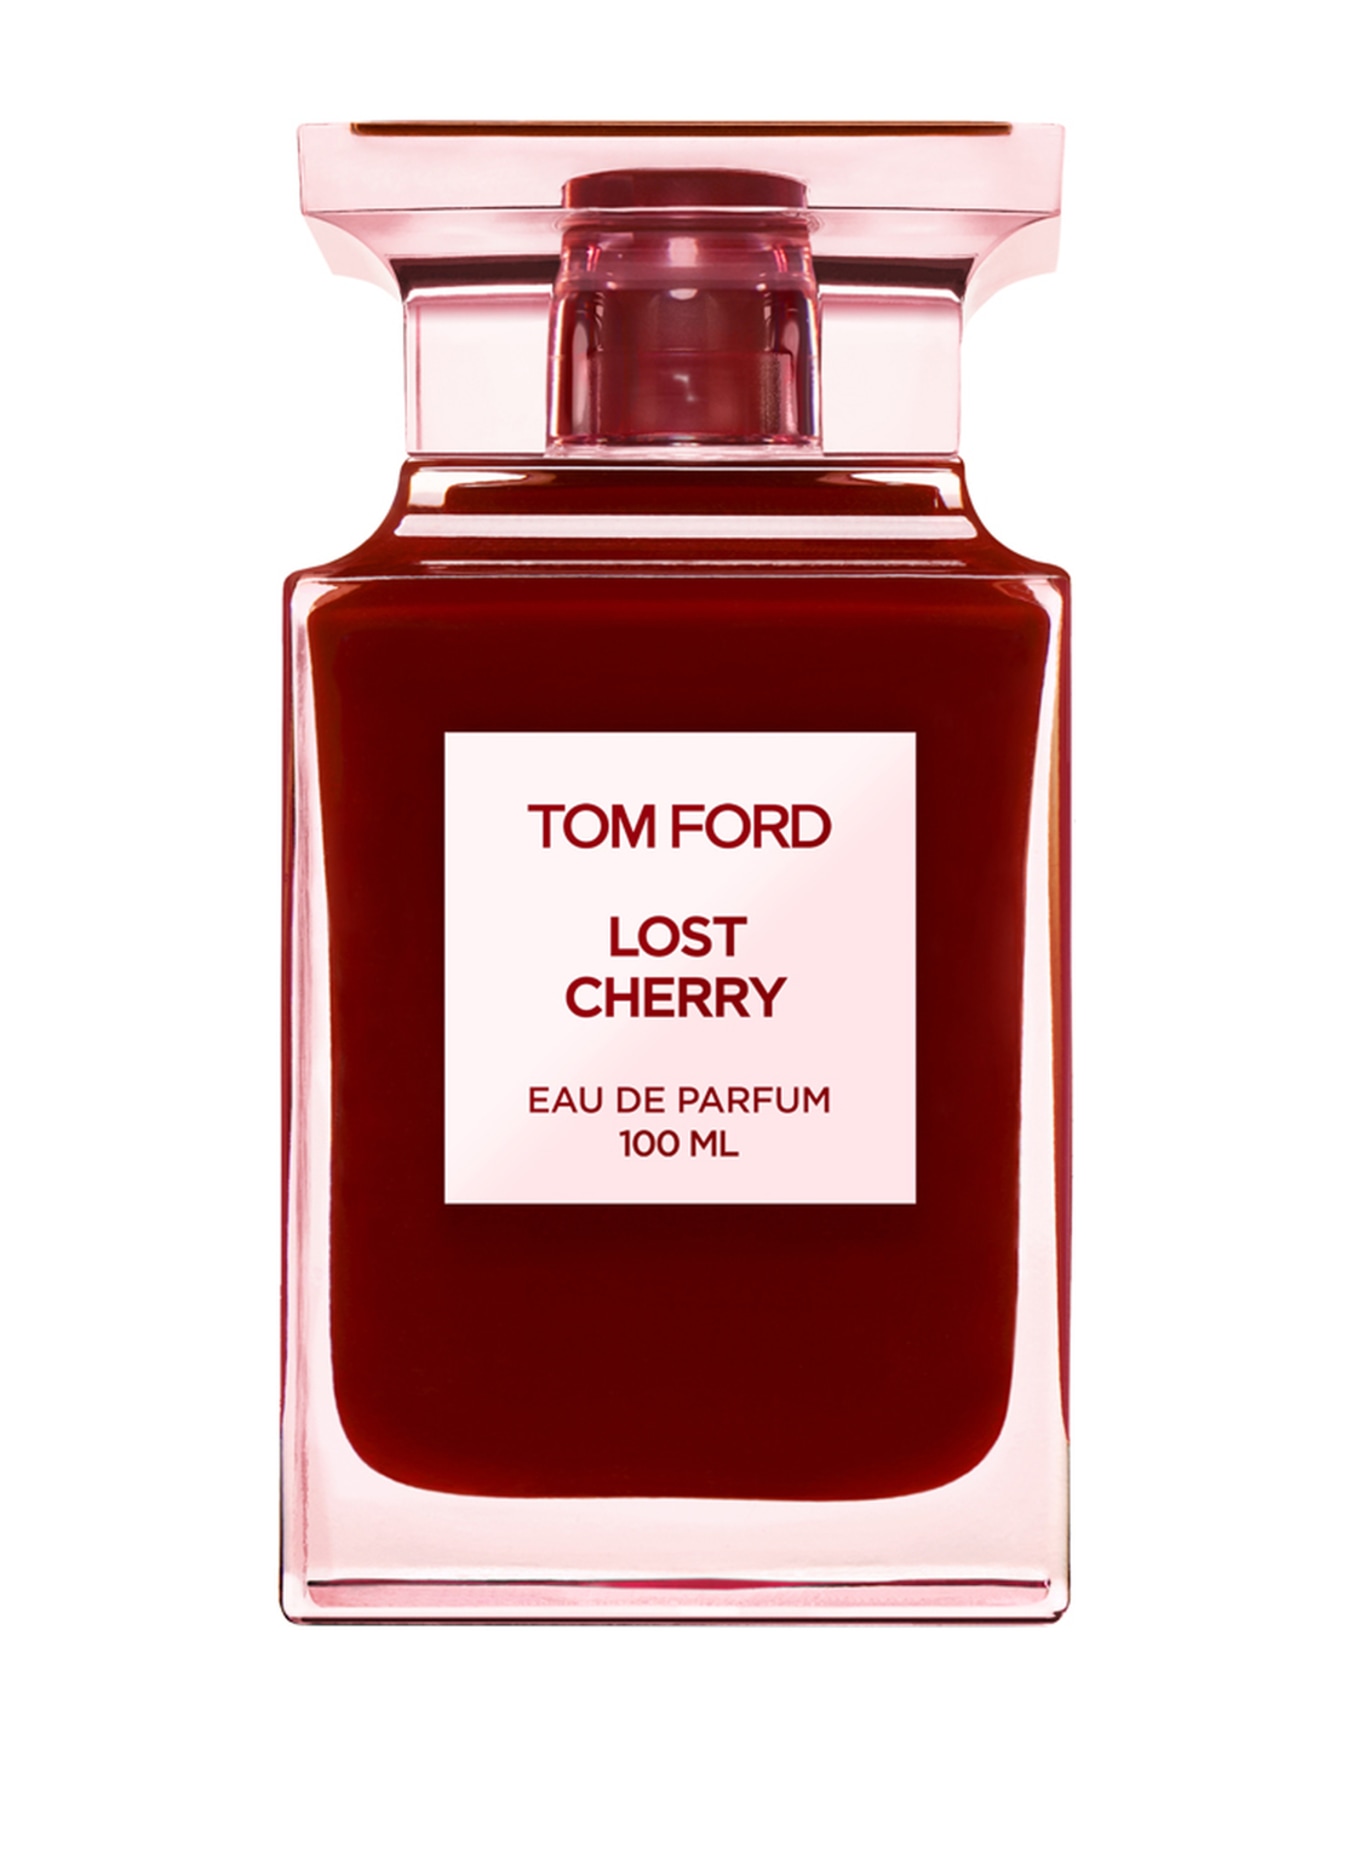 TOM FORD BEAUTY LOST CHERRY(Obrázek null)